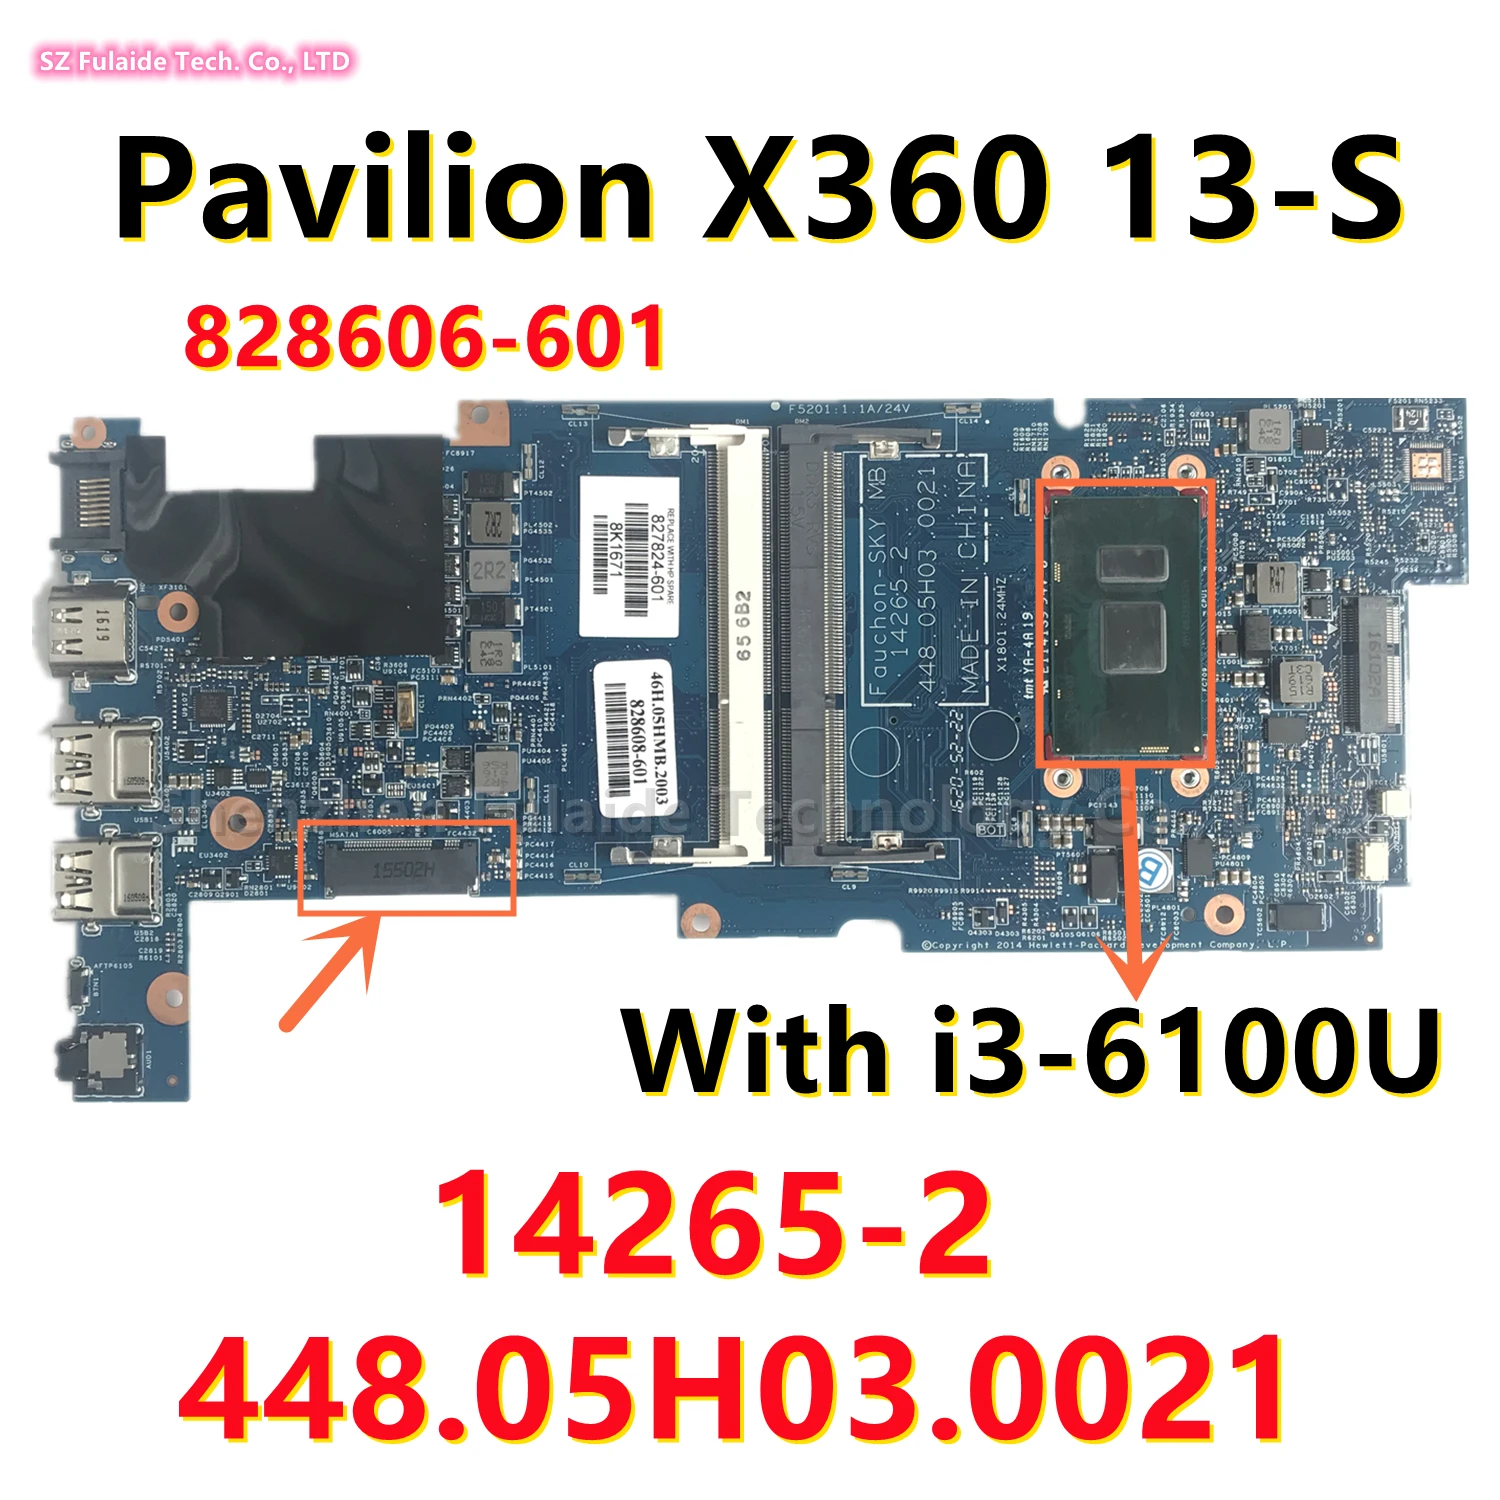 

827822-001 828606-601 Mainboard For HP Pavilion X360 13-S Laptop motherboard With I3-6100 CPU 14265-2 448.05H03.0021 SR2EU